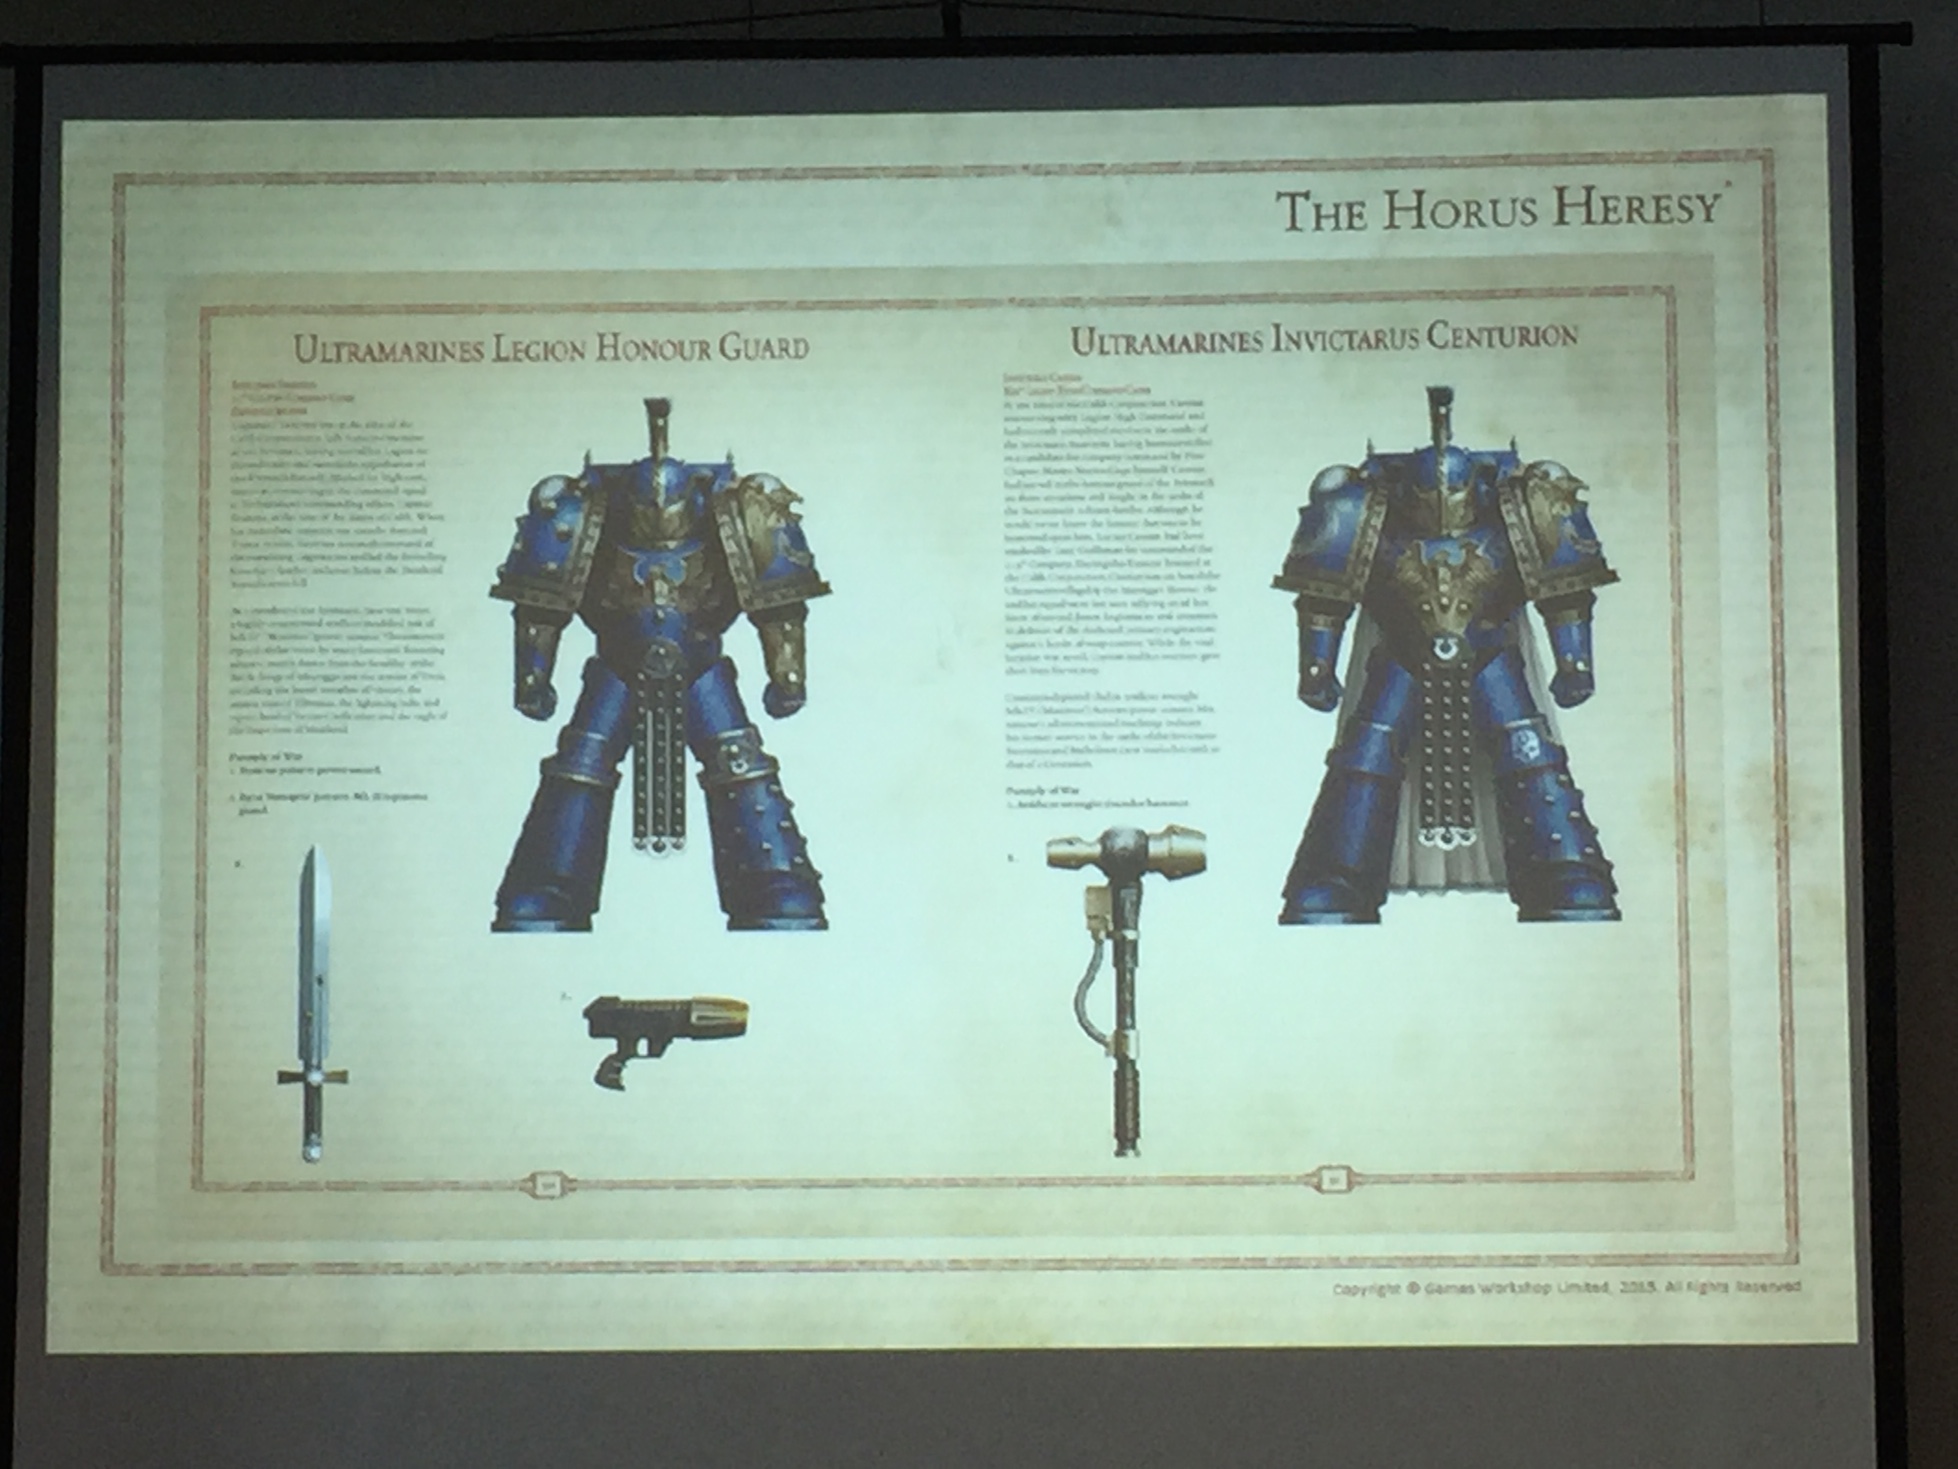 Horus Heresy Book Five - "Tempest" Previewed - Bell of Lost Souls